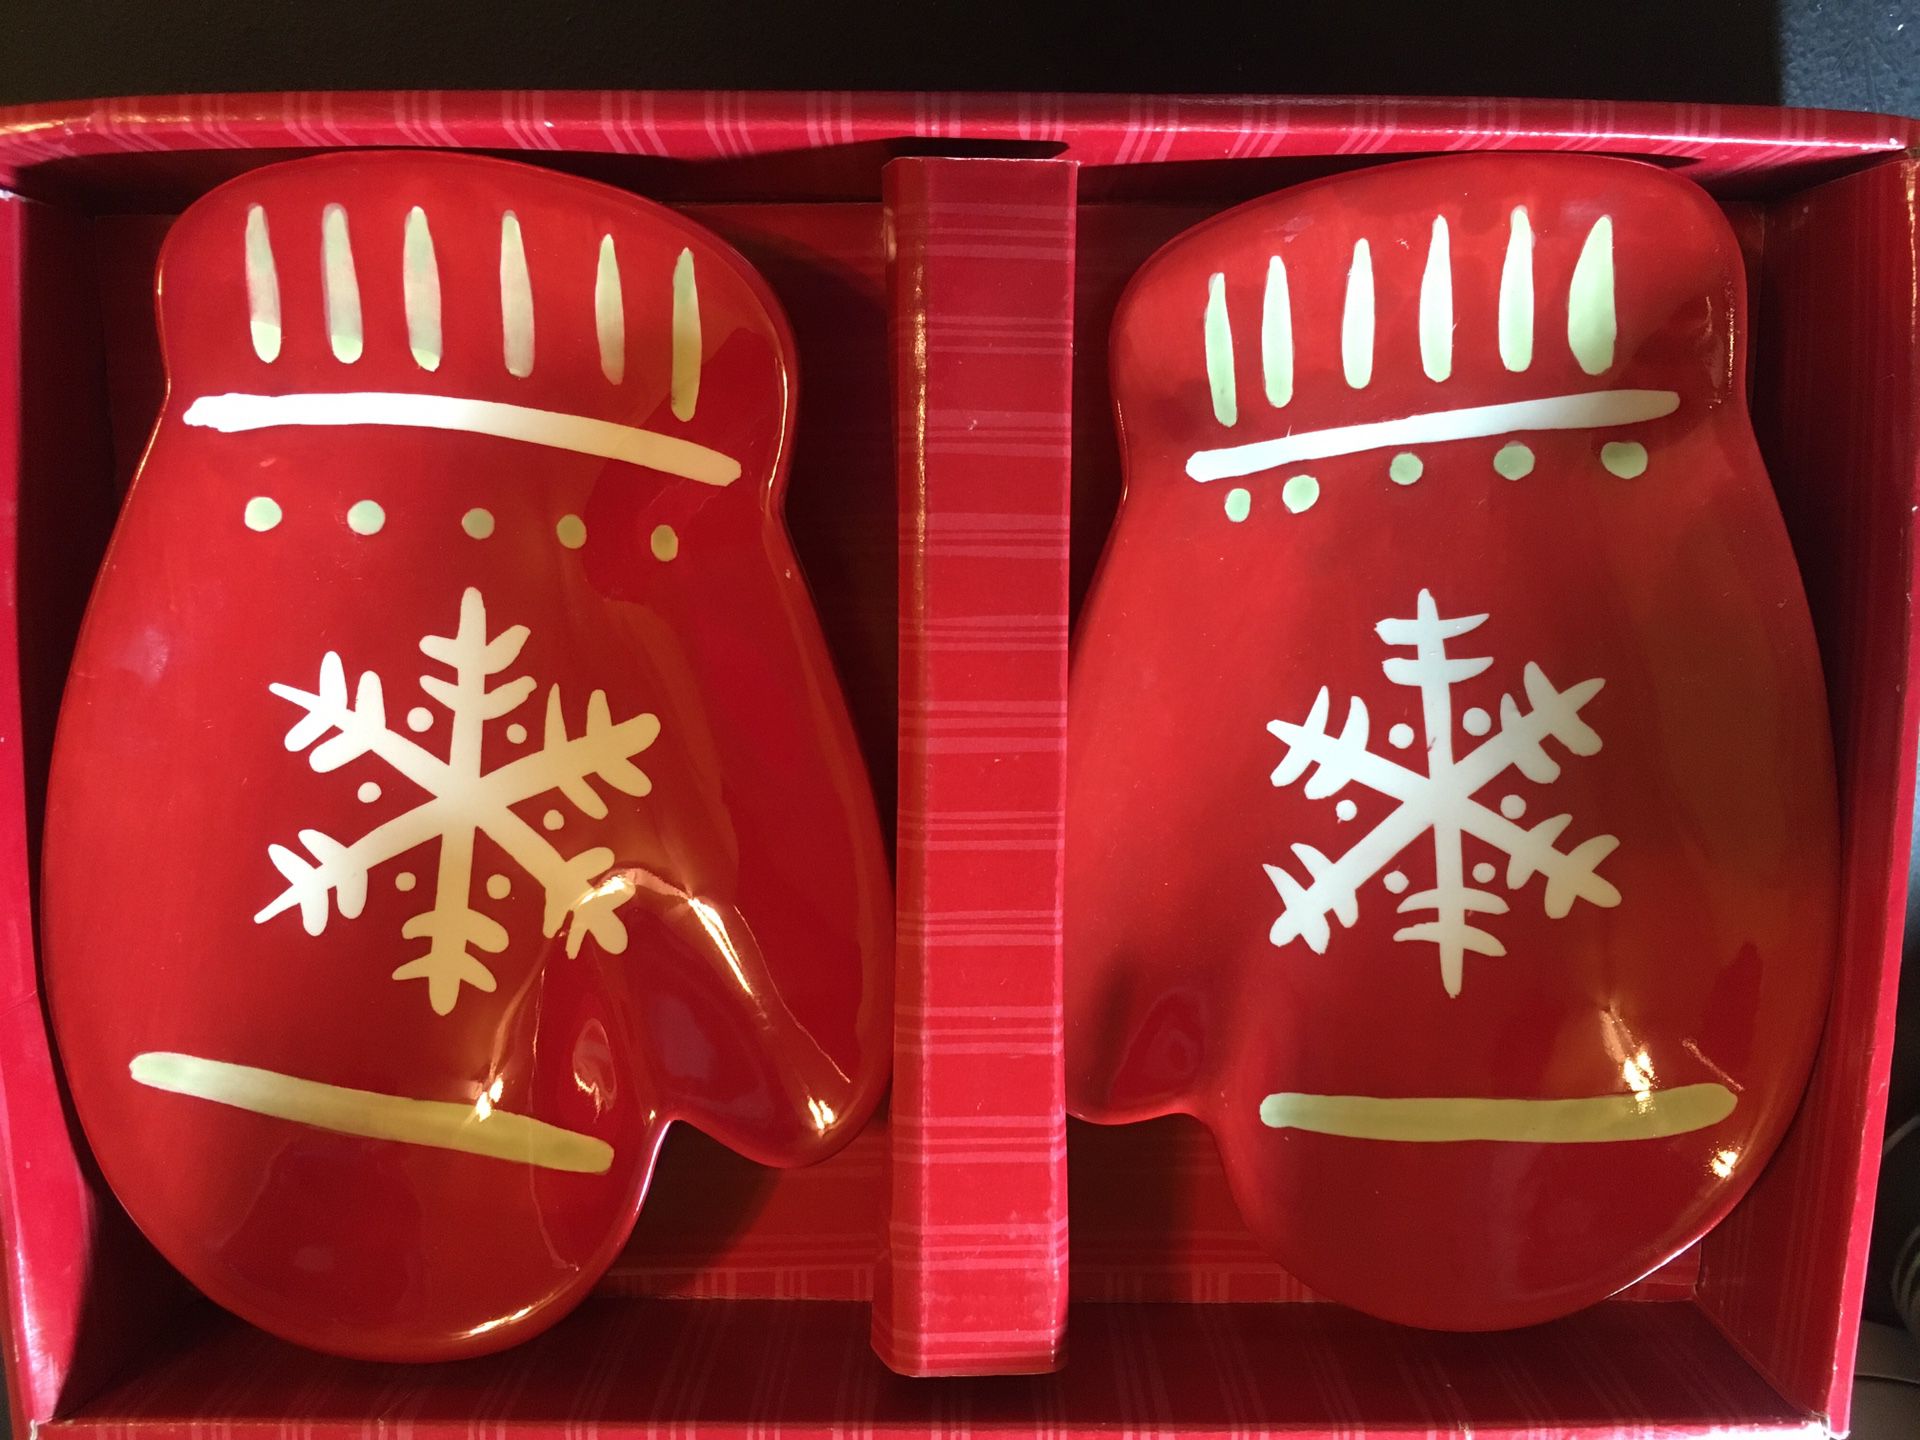 Xmas “Mittens” candy dishes